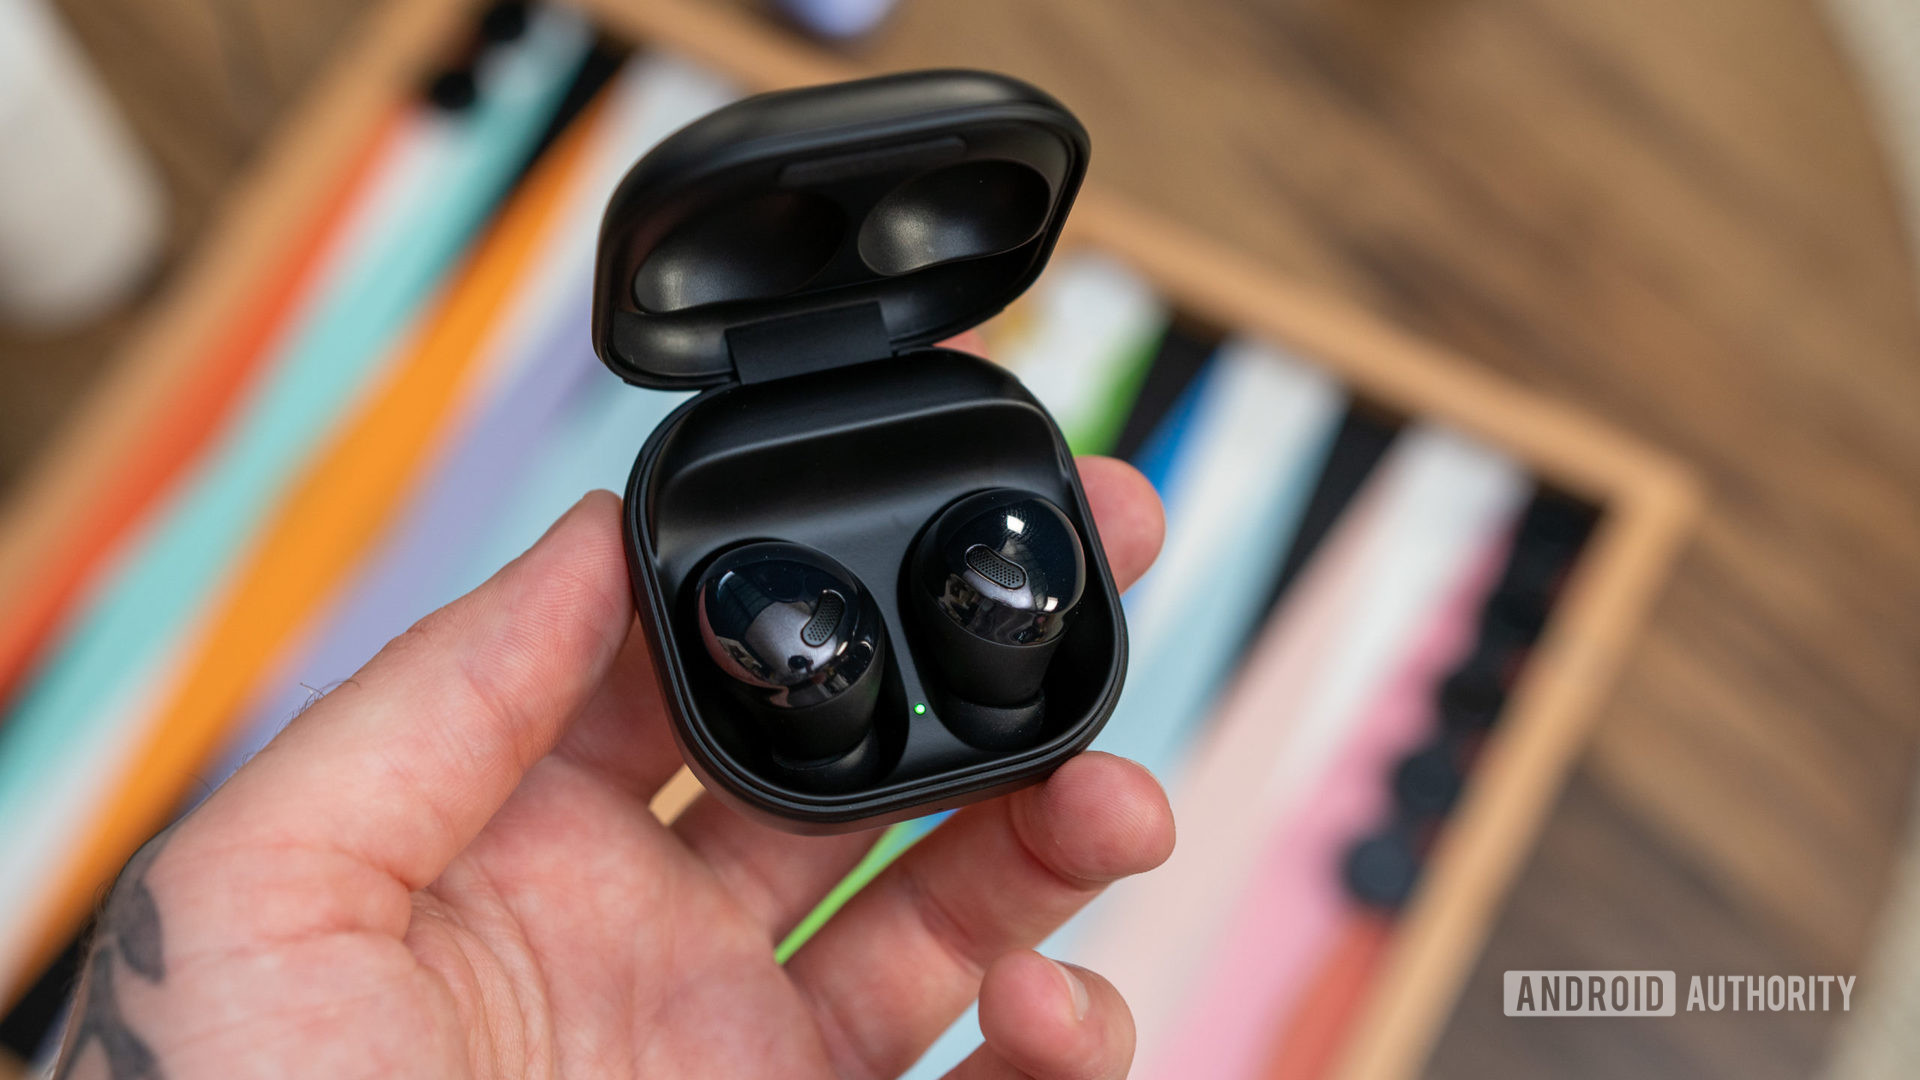 Apple Airpods vs Samsung Galaxy Buds Pro: Which Pro is best for you?